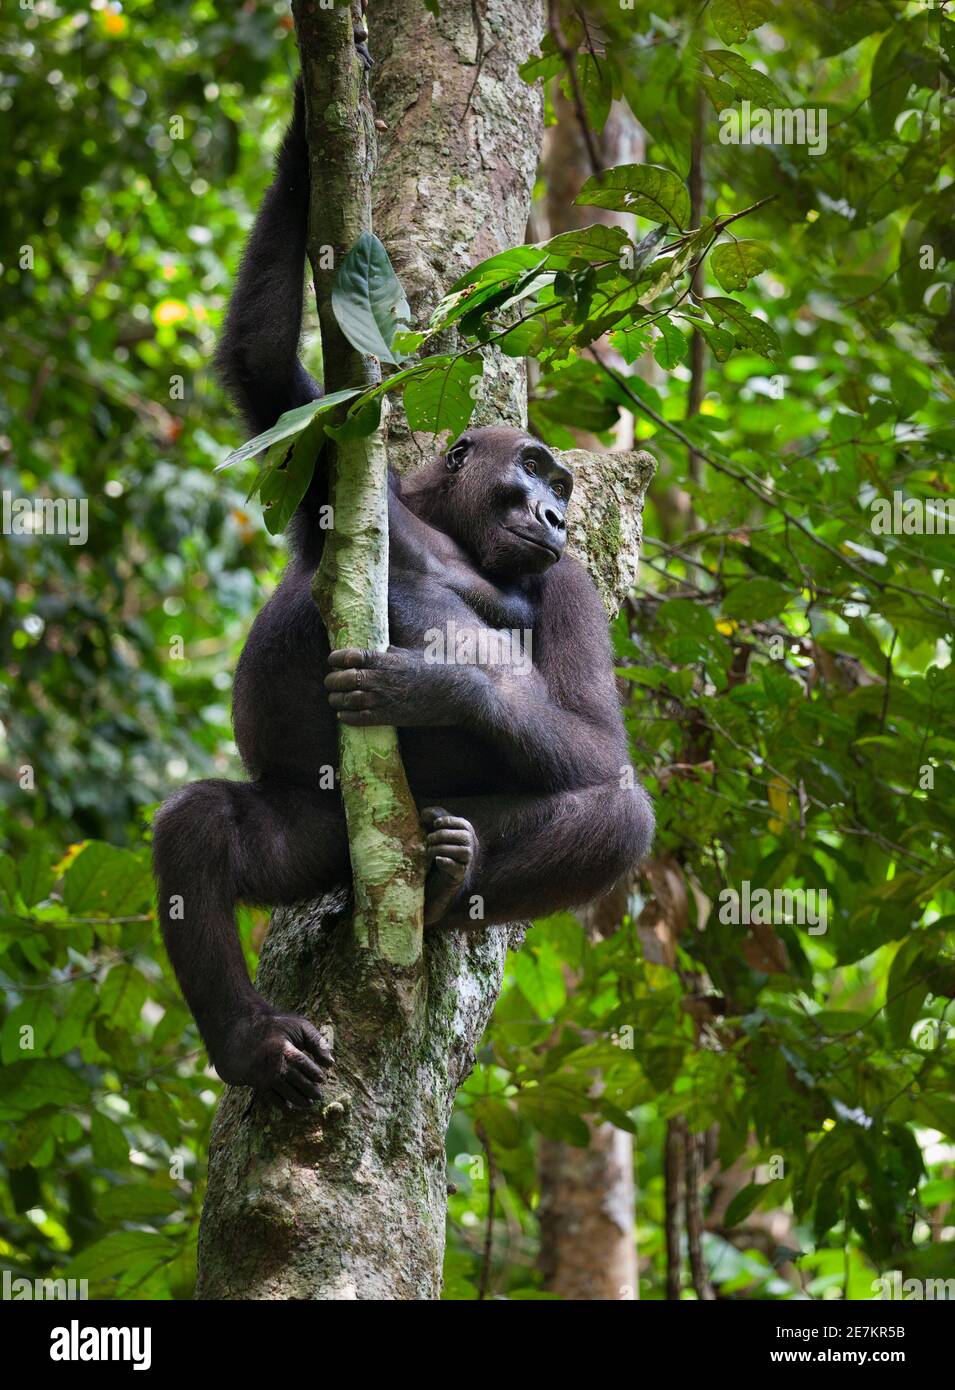 Western lowland Gorilla (Gorilla gorilla gorilla) in tree, Loango National Park, Gabon, central Africa. Critically endangered. Stock Photo